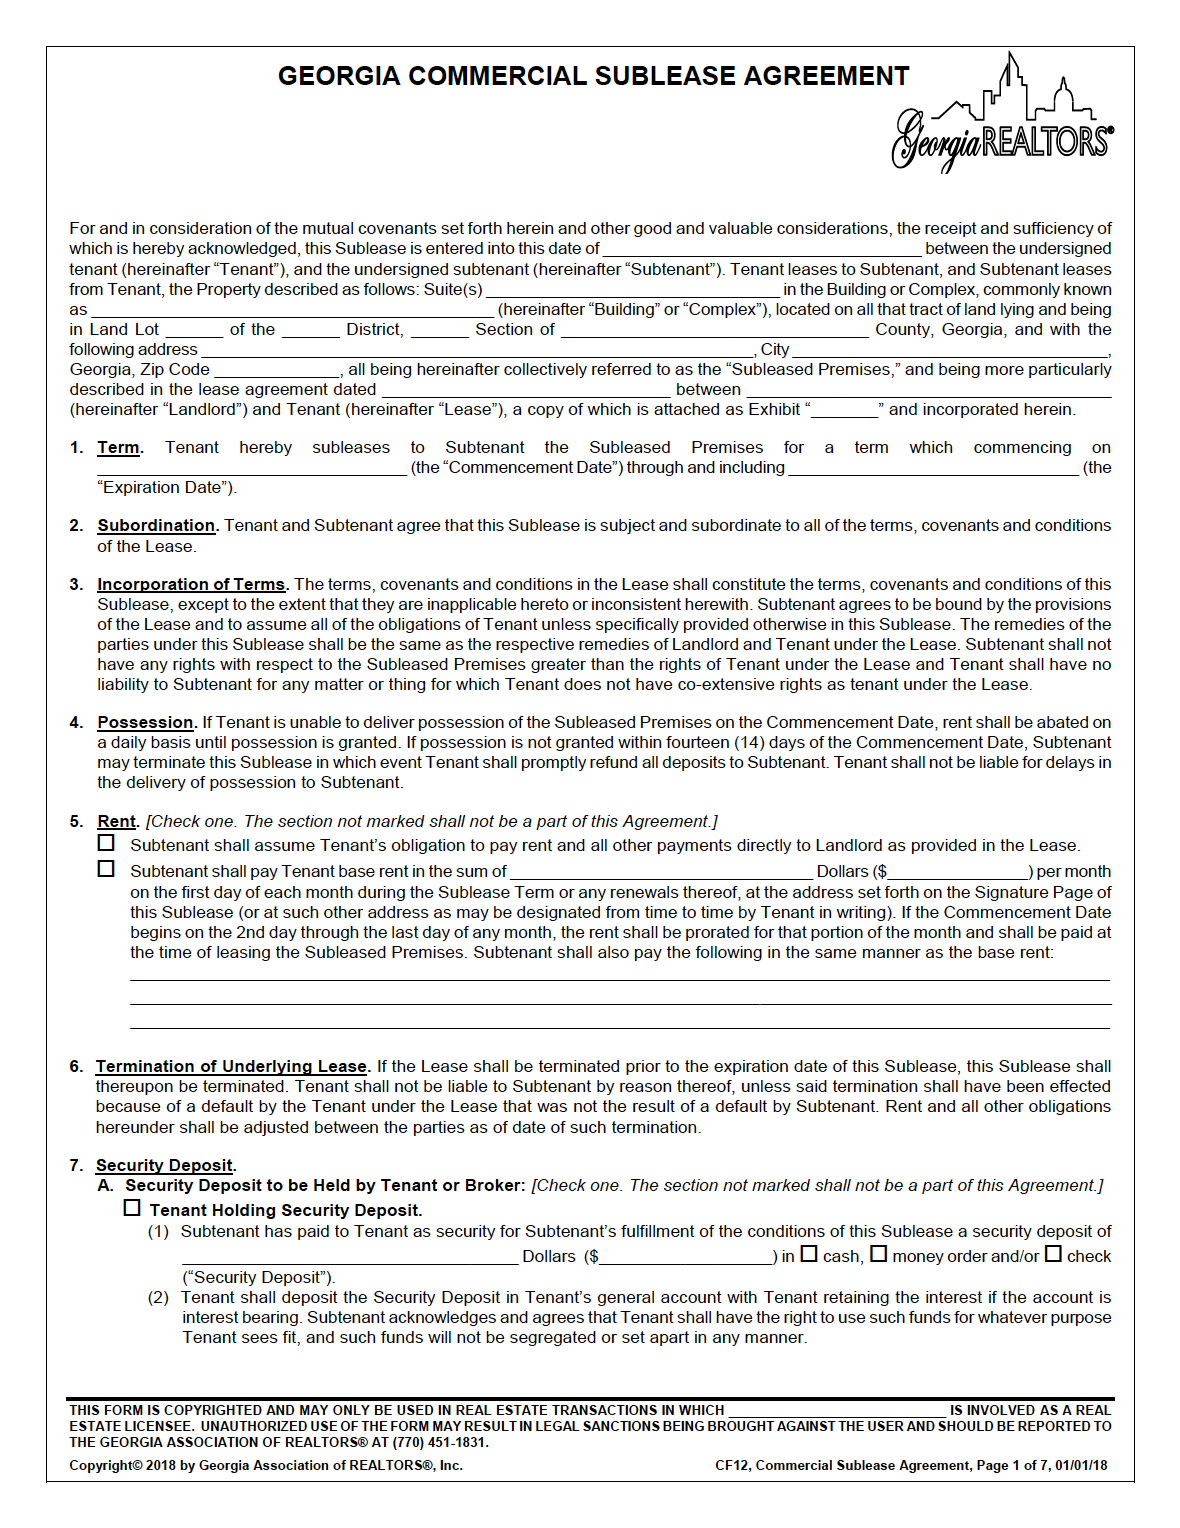 free-georgia-commercial-sublease-agreement-pdf